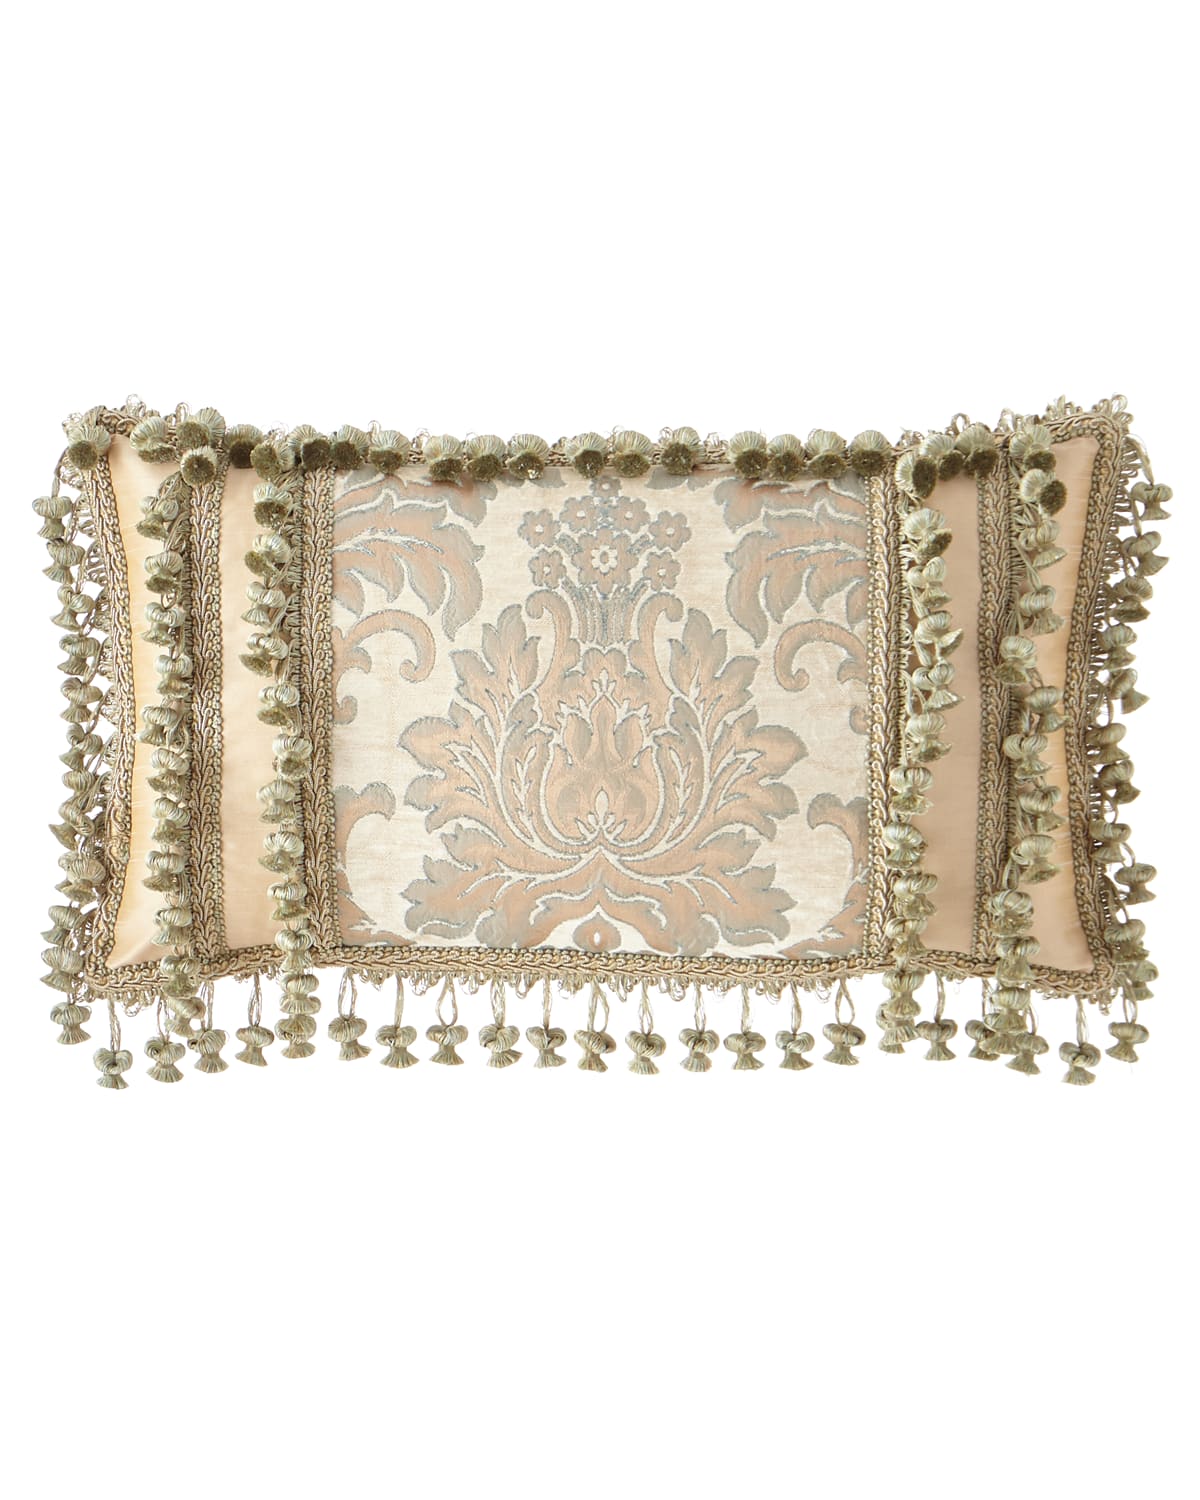 Image Sweet Dreams Gianna Oblong Pillow with Onion Fringe